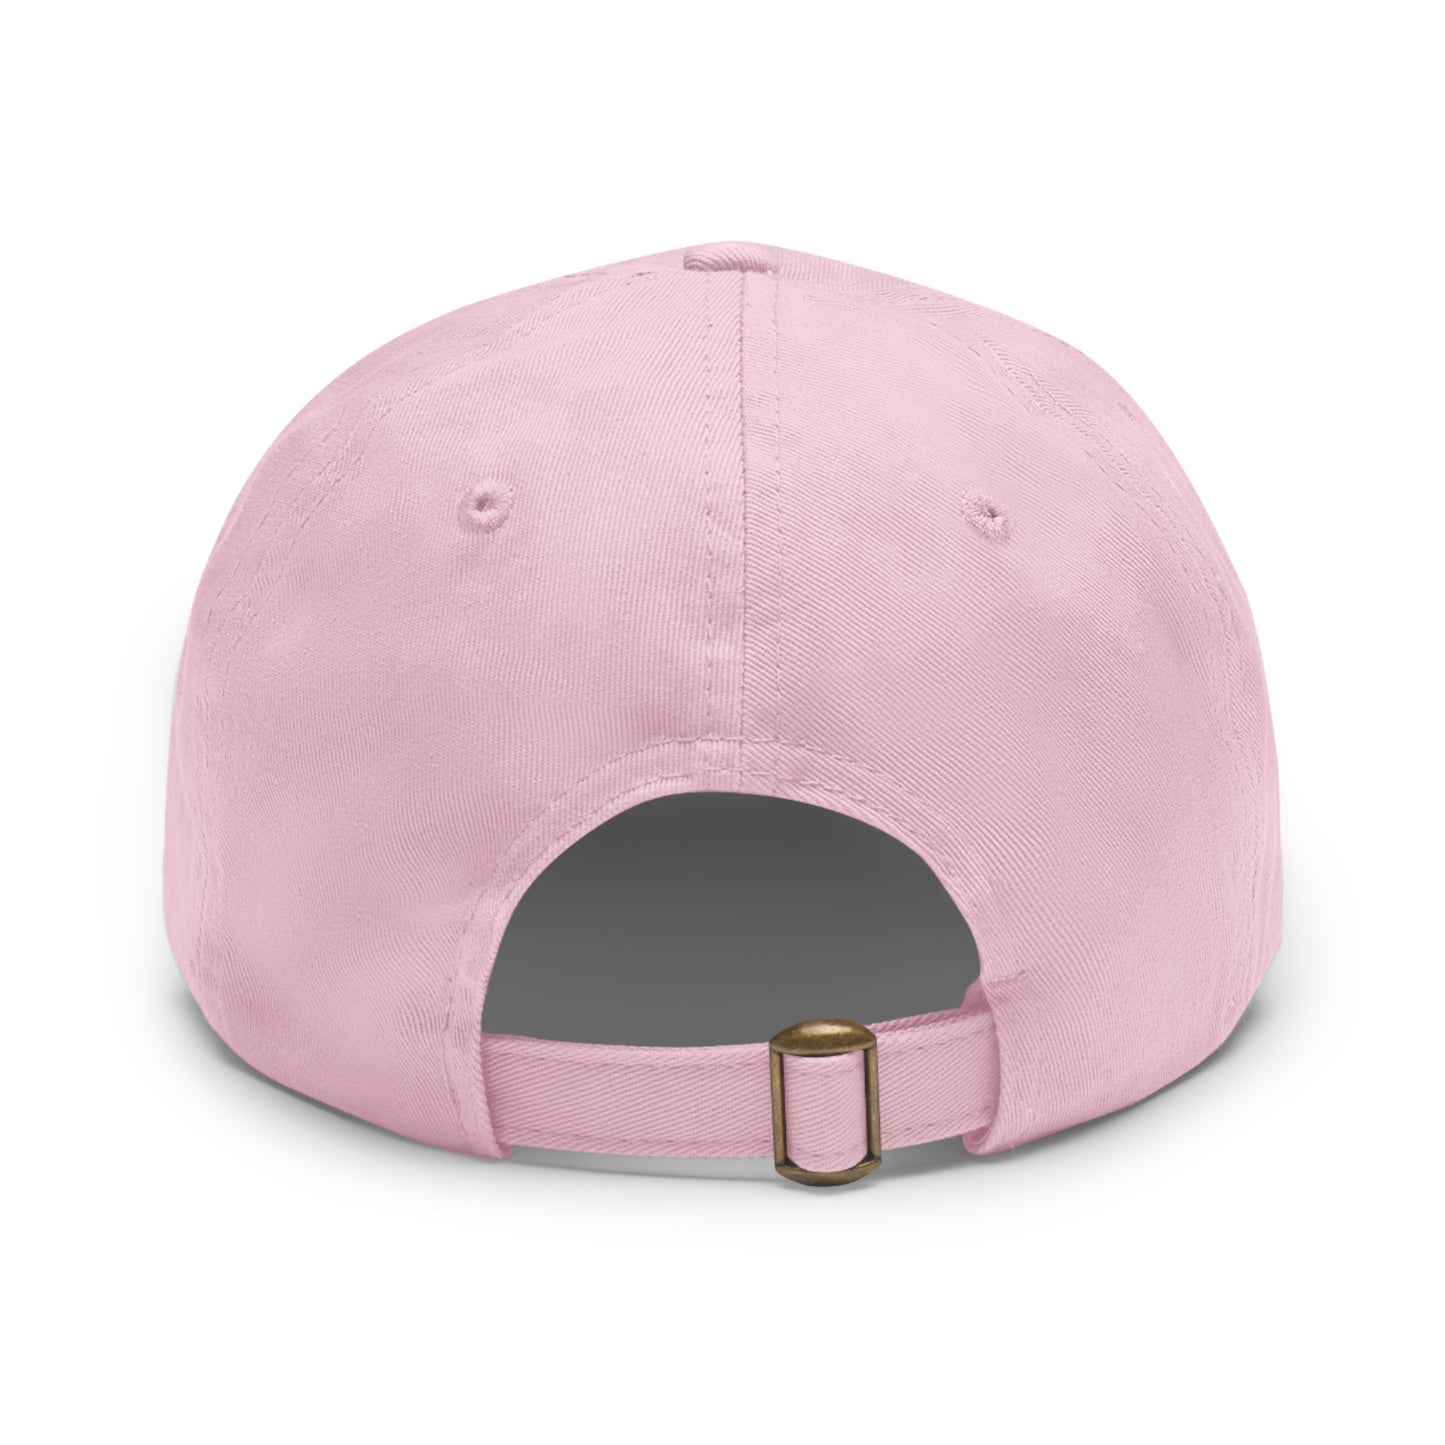 Hat: Women & Cannabis with Leather Patch (Rectangle)